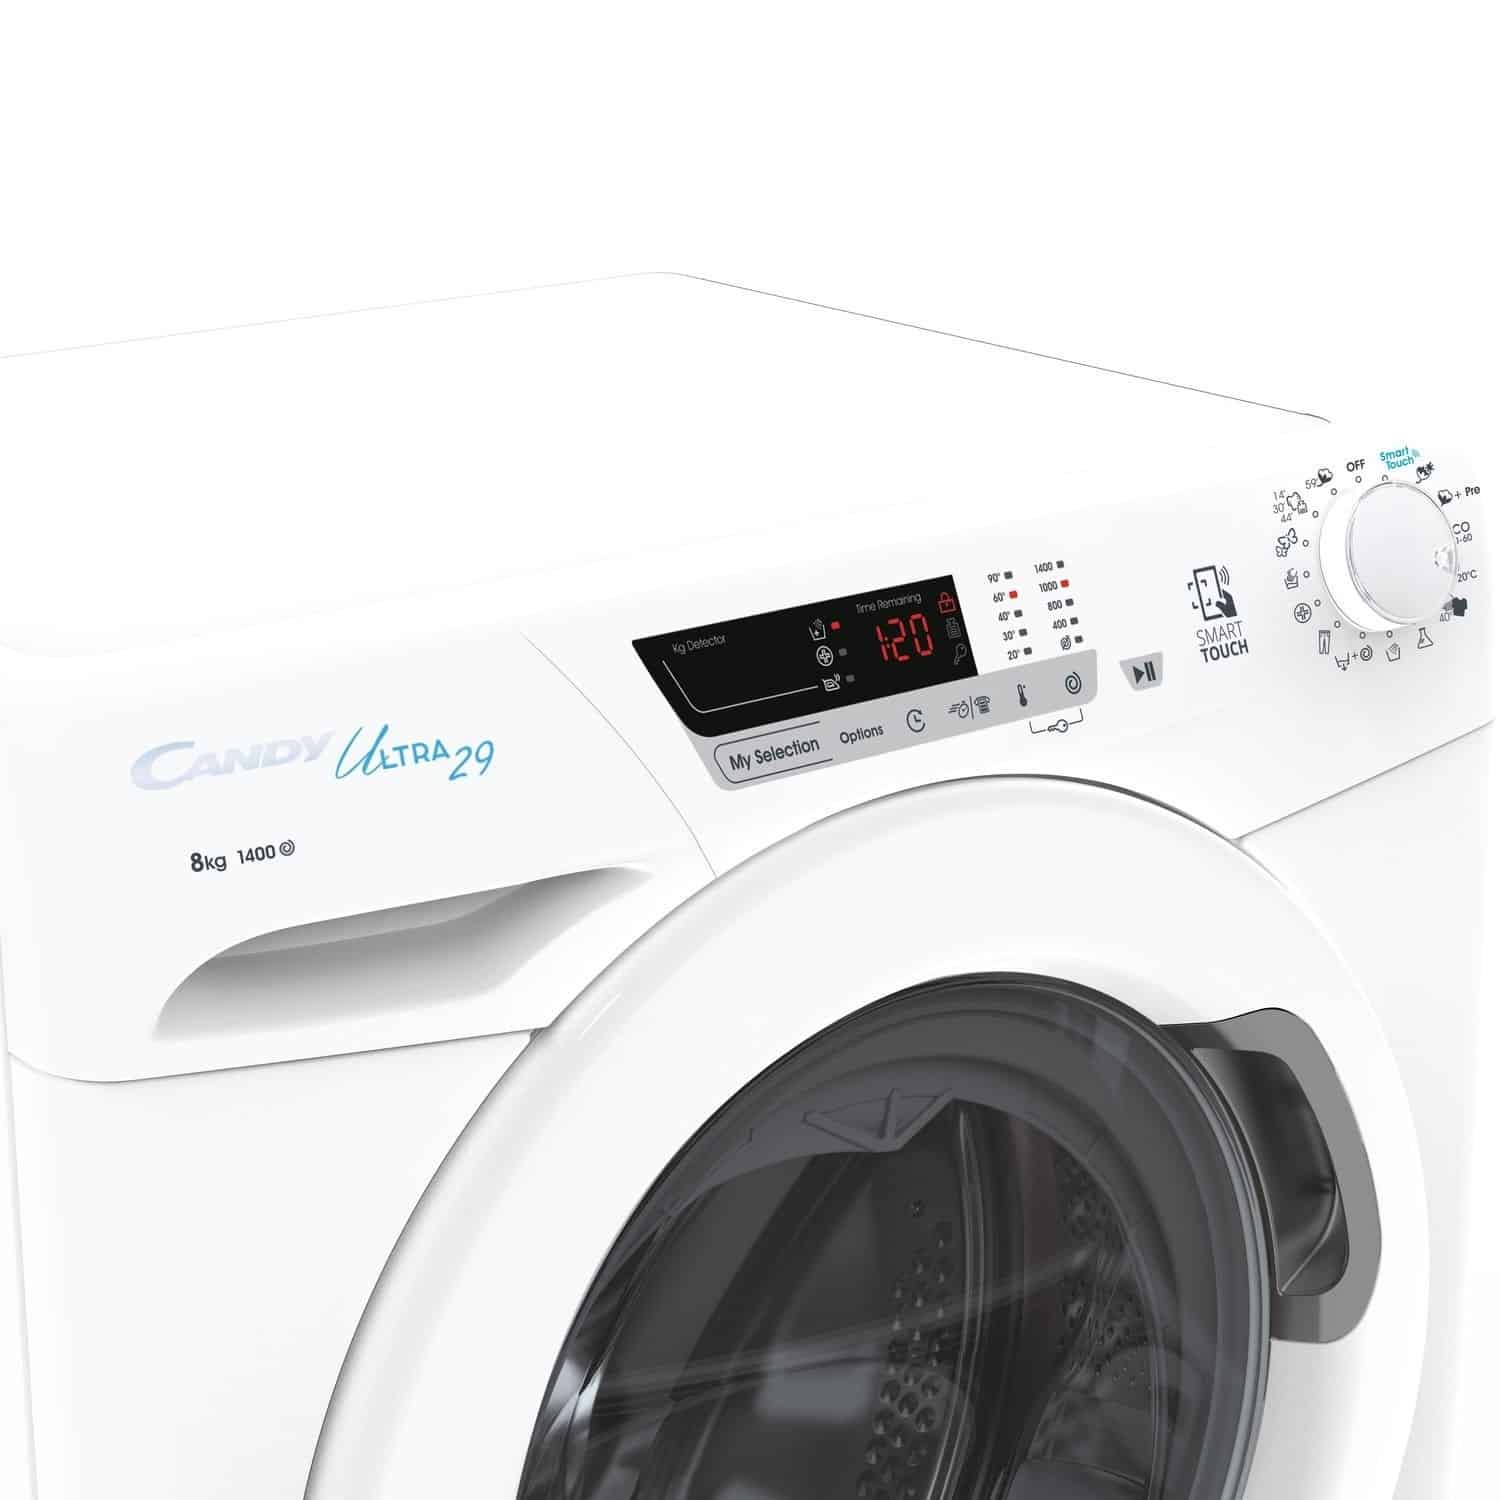 Candy Ultra HCU1482DE/1-80 Freestanding Washing Machine, 8kg, 1400 rpm, Android App Enabled 6389